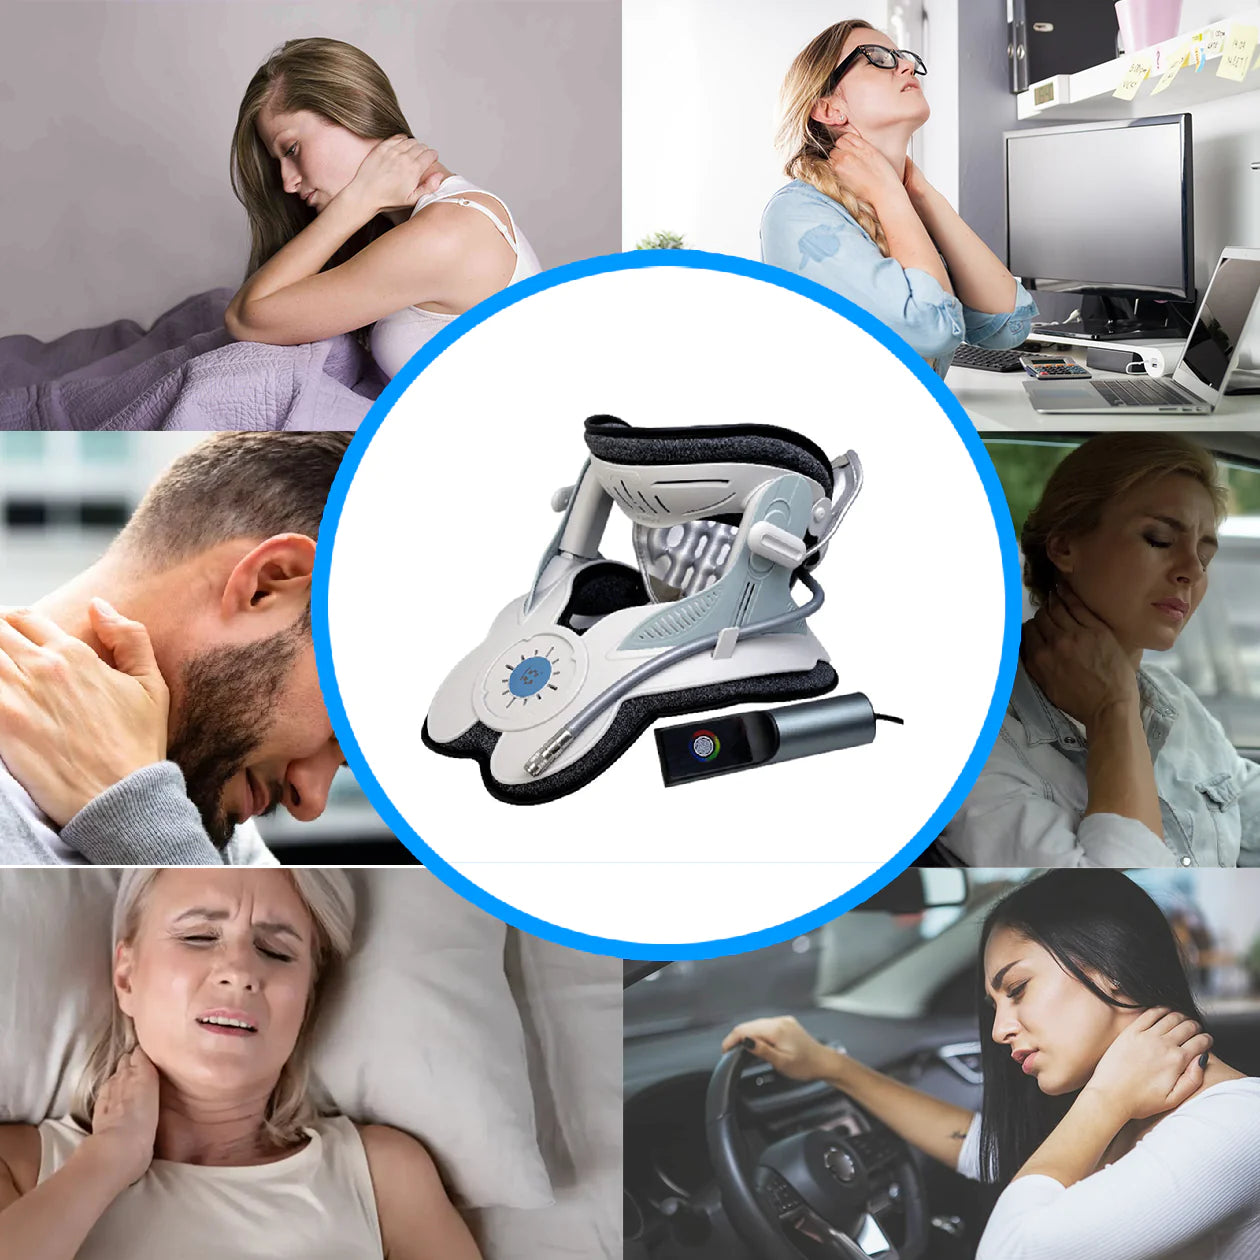 Versatile use of SpineAlign Traction Collar in home, office, and travel settings for continuous neck support and posture improvement